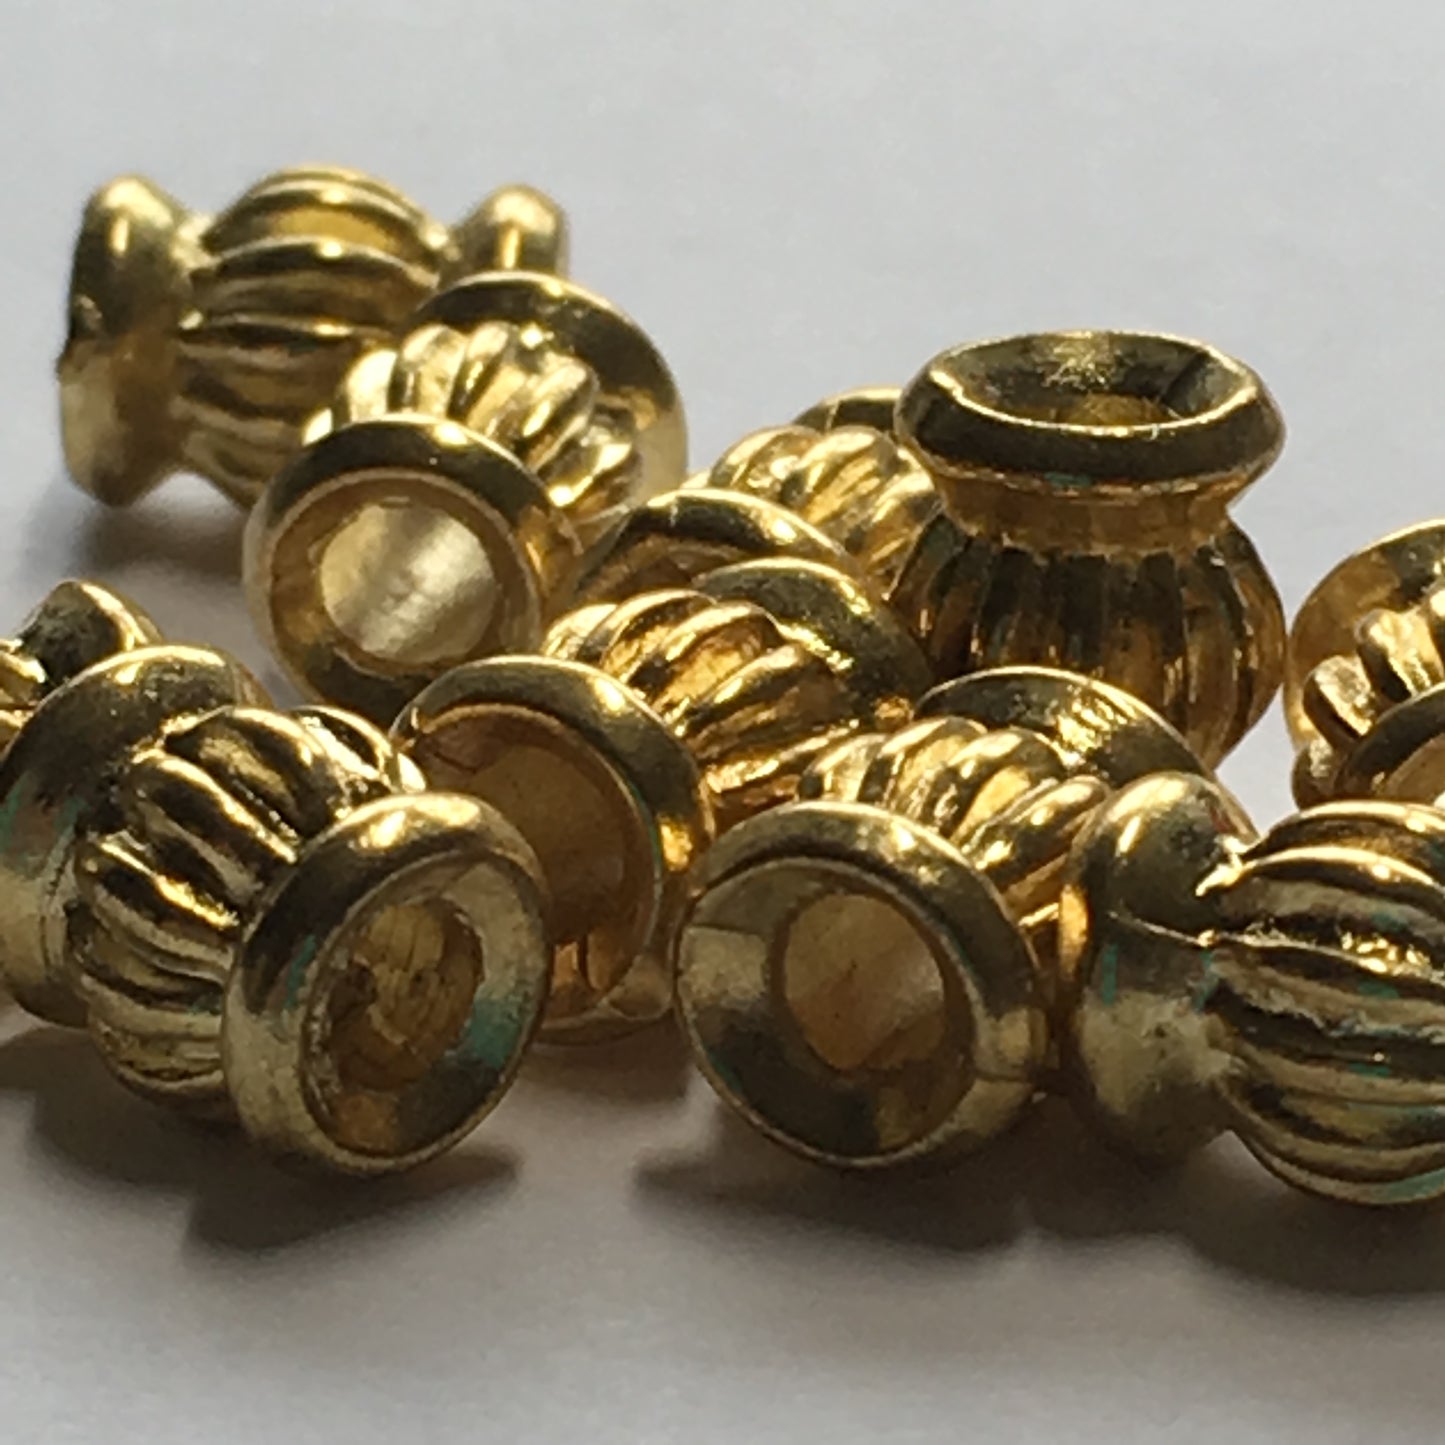 Gold Fluted Barrel Beads, 9 x 6 mm - 10 Beads